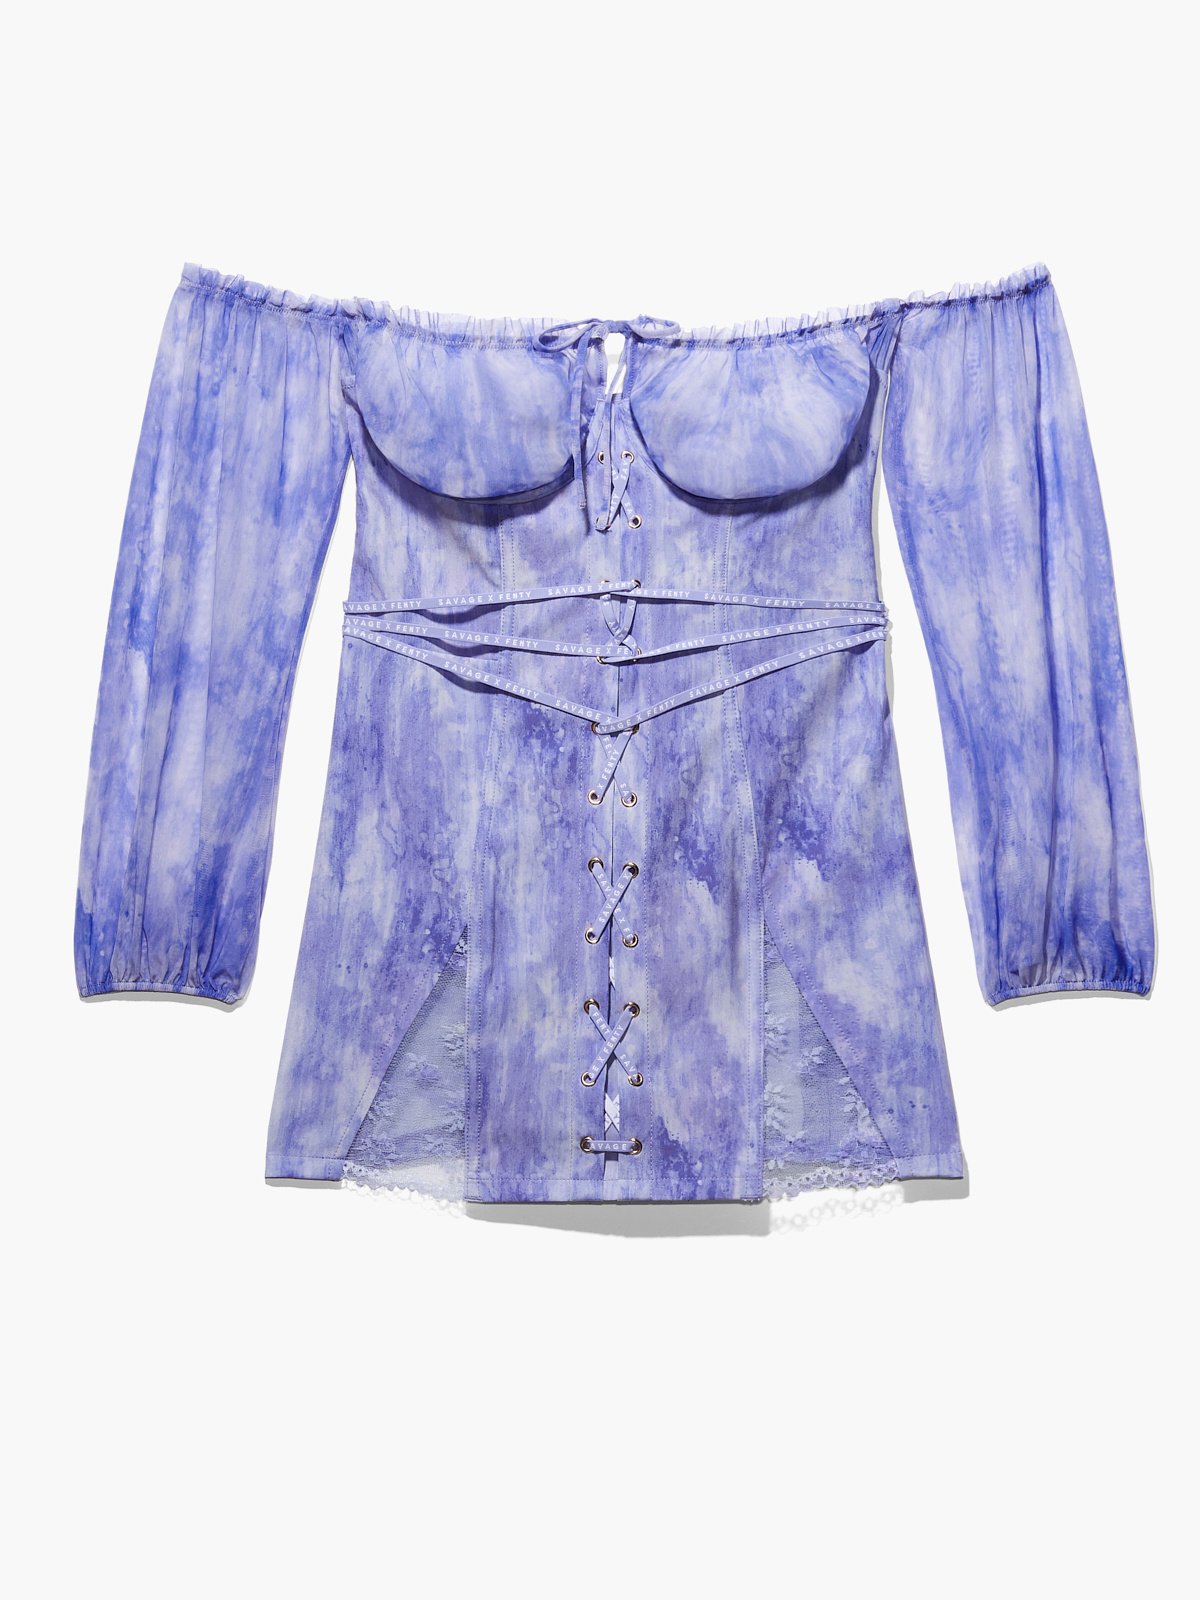 Dyeing advice for Victoria Secret corset top : r/dyeing